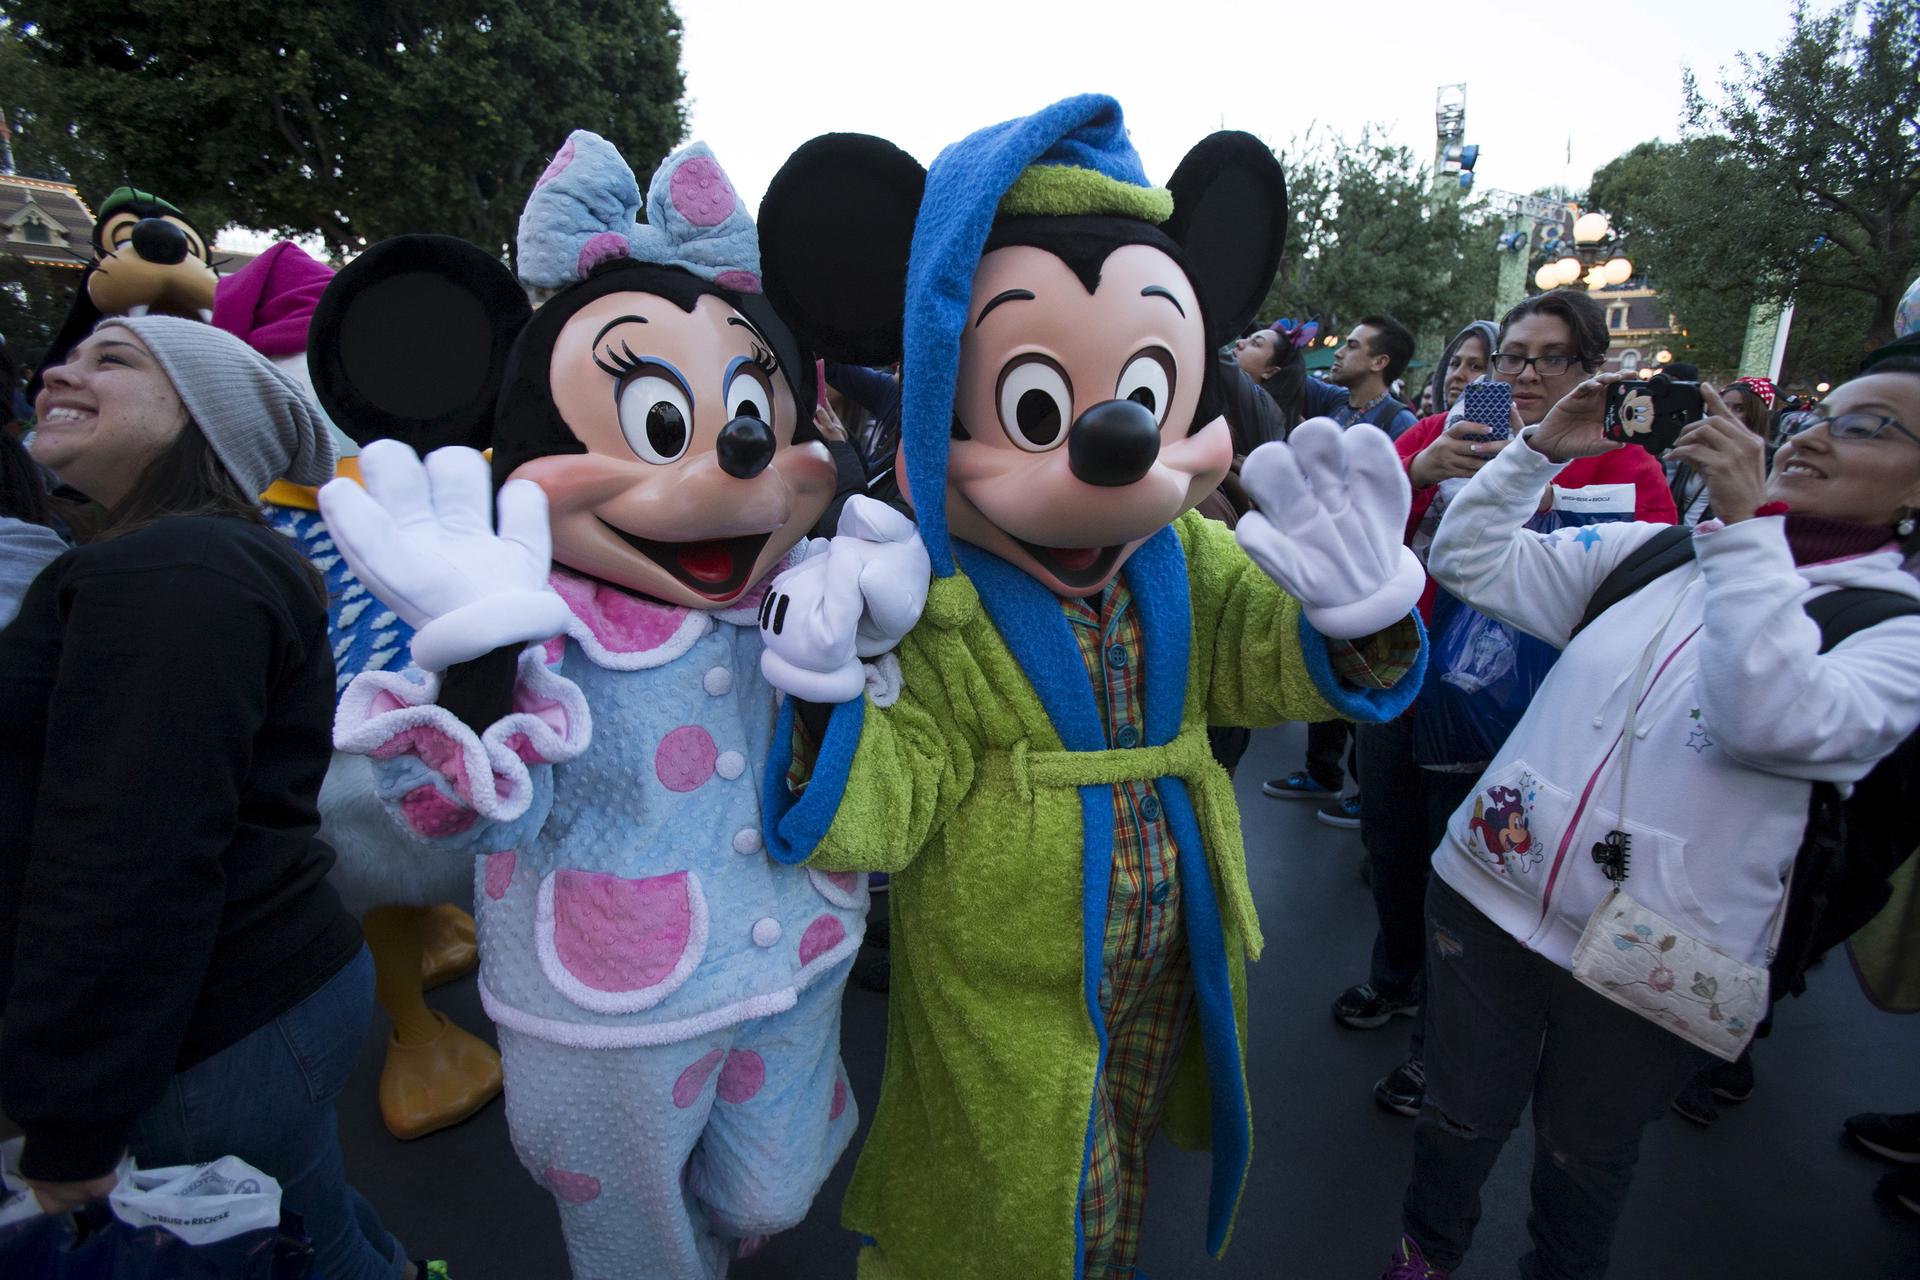 The characters of Mickey Mouse and Minnie Mouse greet guests during Disneyland's Diamond Celebration in Anaheim, California May 23, 2015.